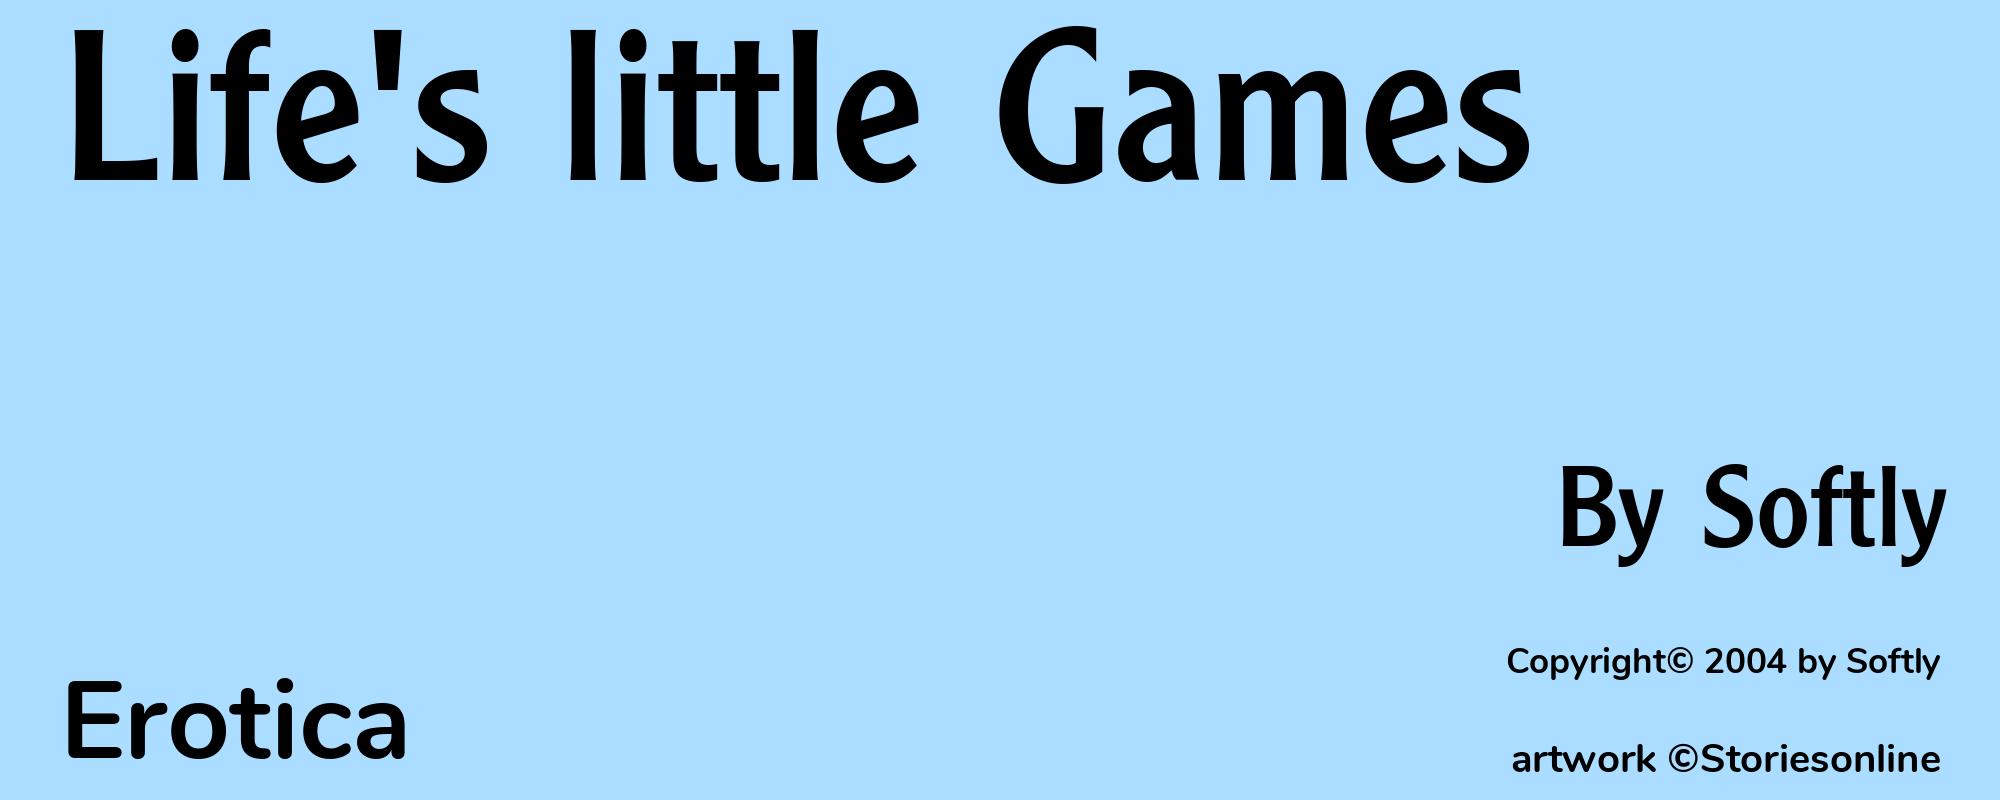 Life's little Games - Cover